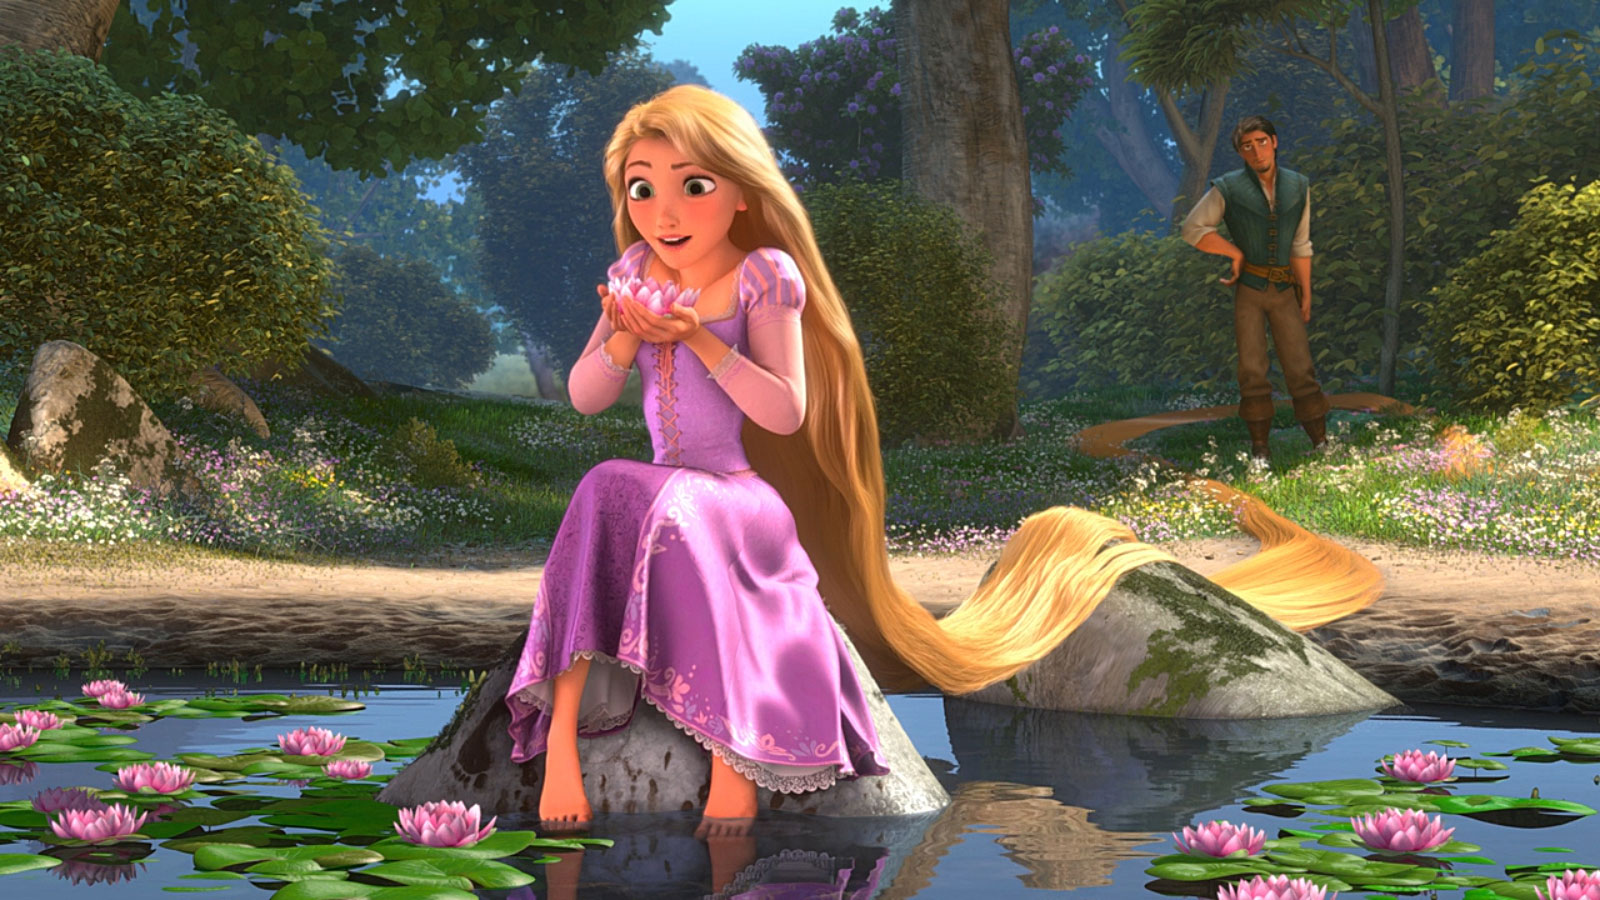 Most Disney Fans Can’t Identify More Than 15/18 of These Movie Foods – Can You? Tangled